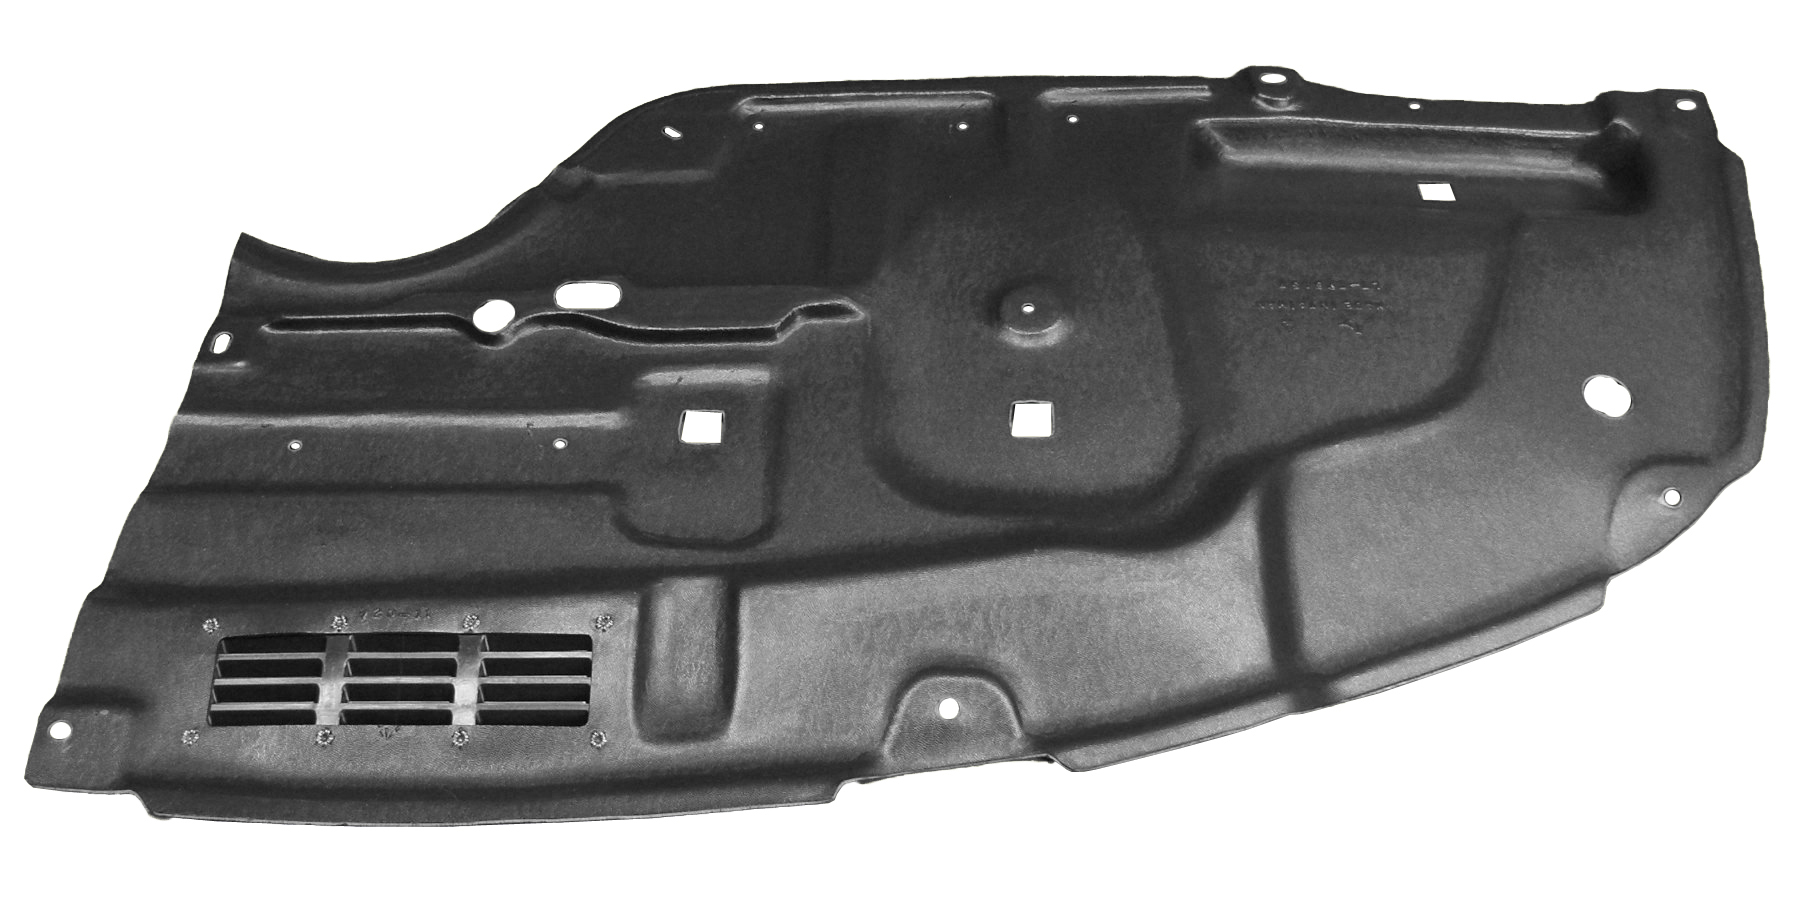 Aftermarket UNDER ENGINE COVERS for TOYOTA - AVALON, AVALON,11-12,Lower engine cover